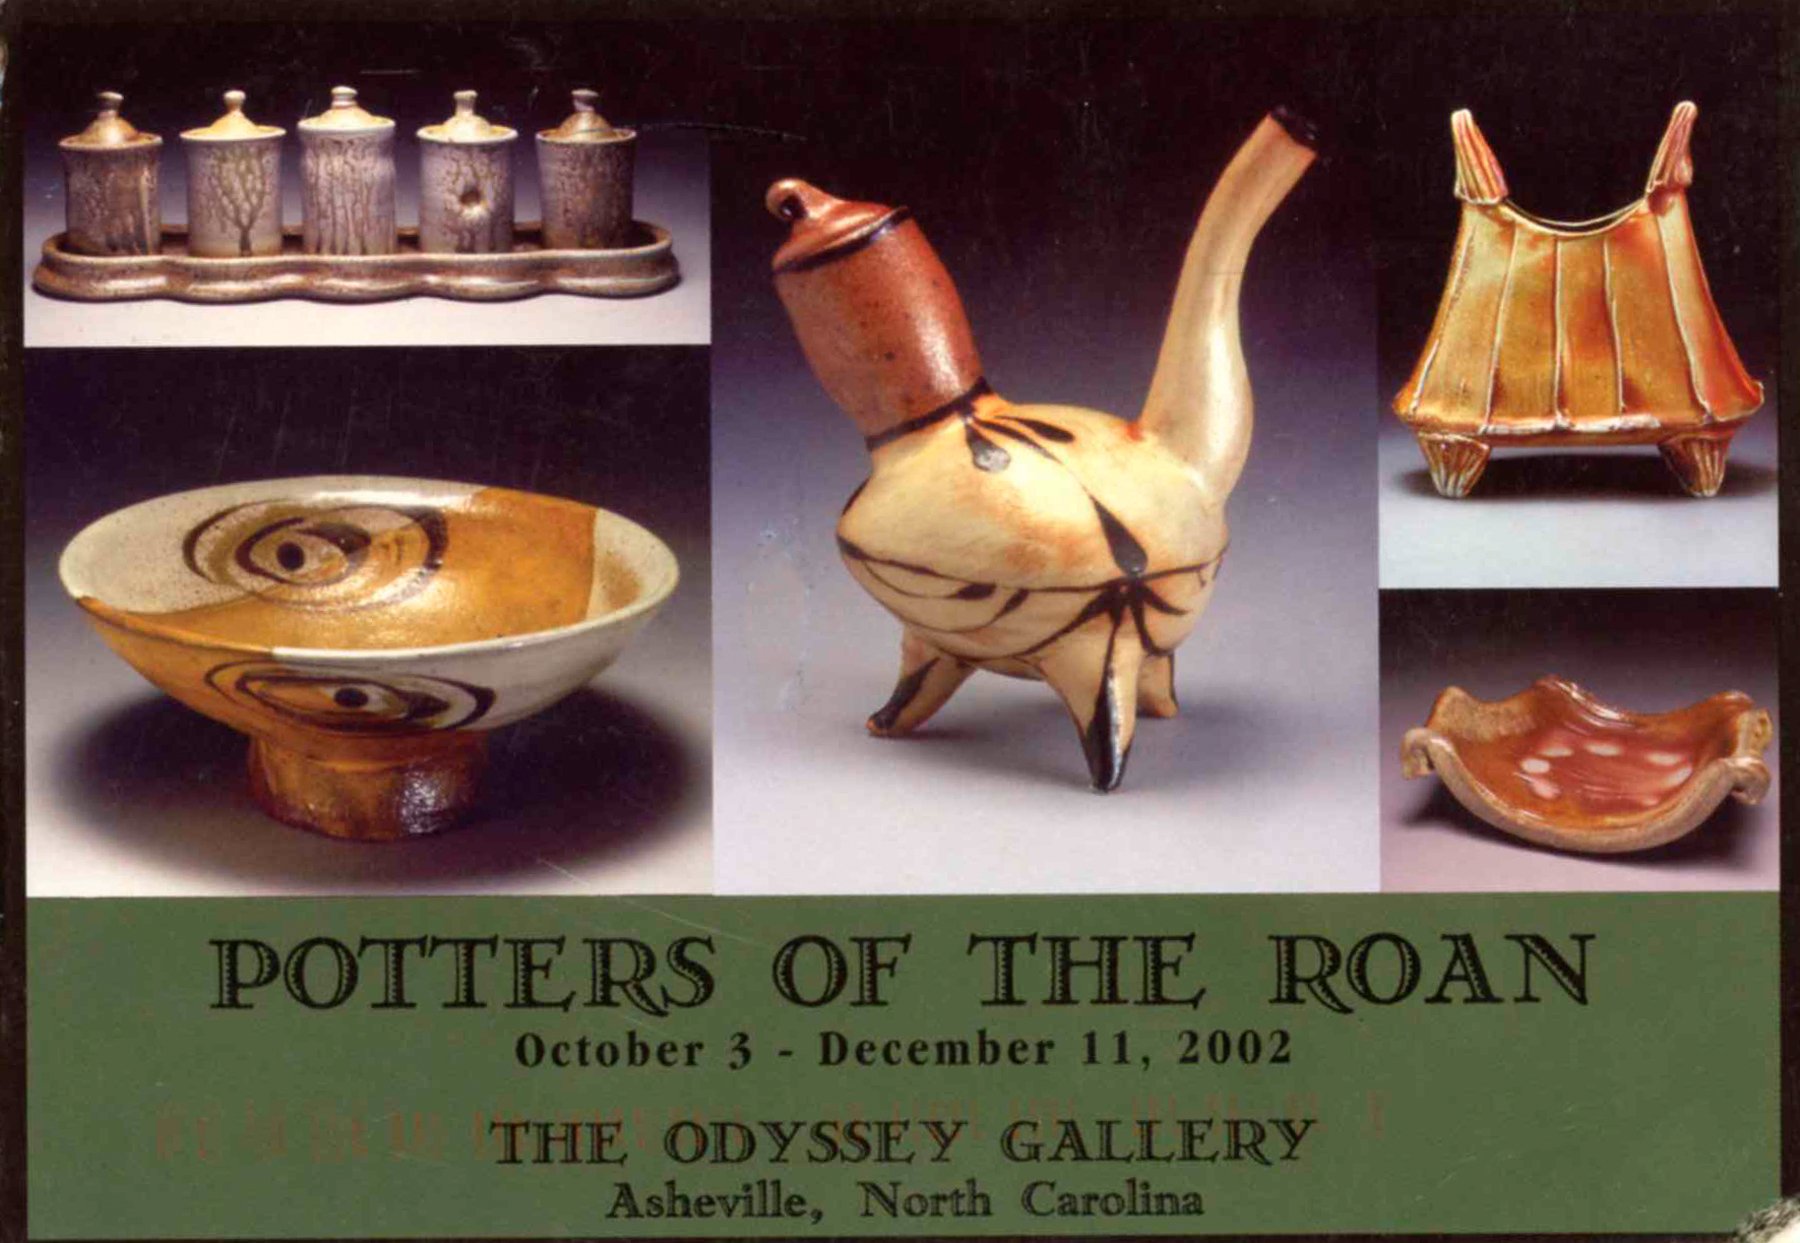 Lindsay_Potters of The Roan The Odessy Gallery Oct.-Dec. 200201.jpg